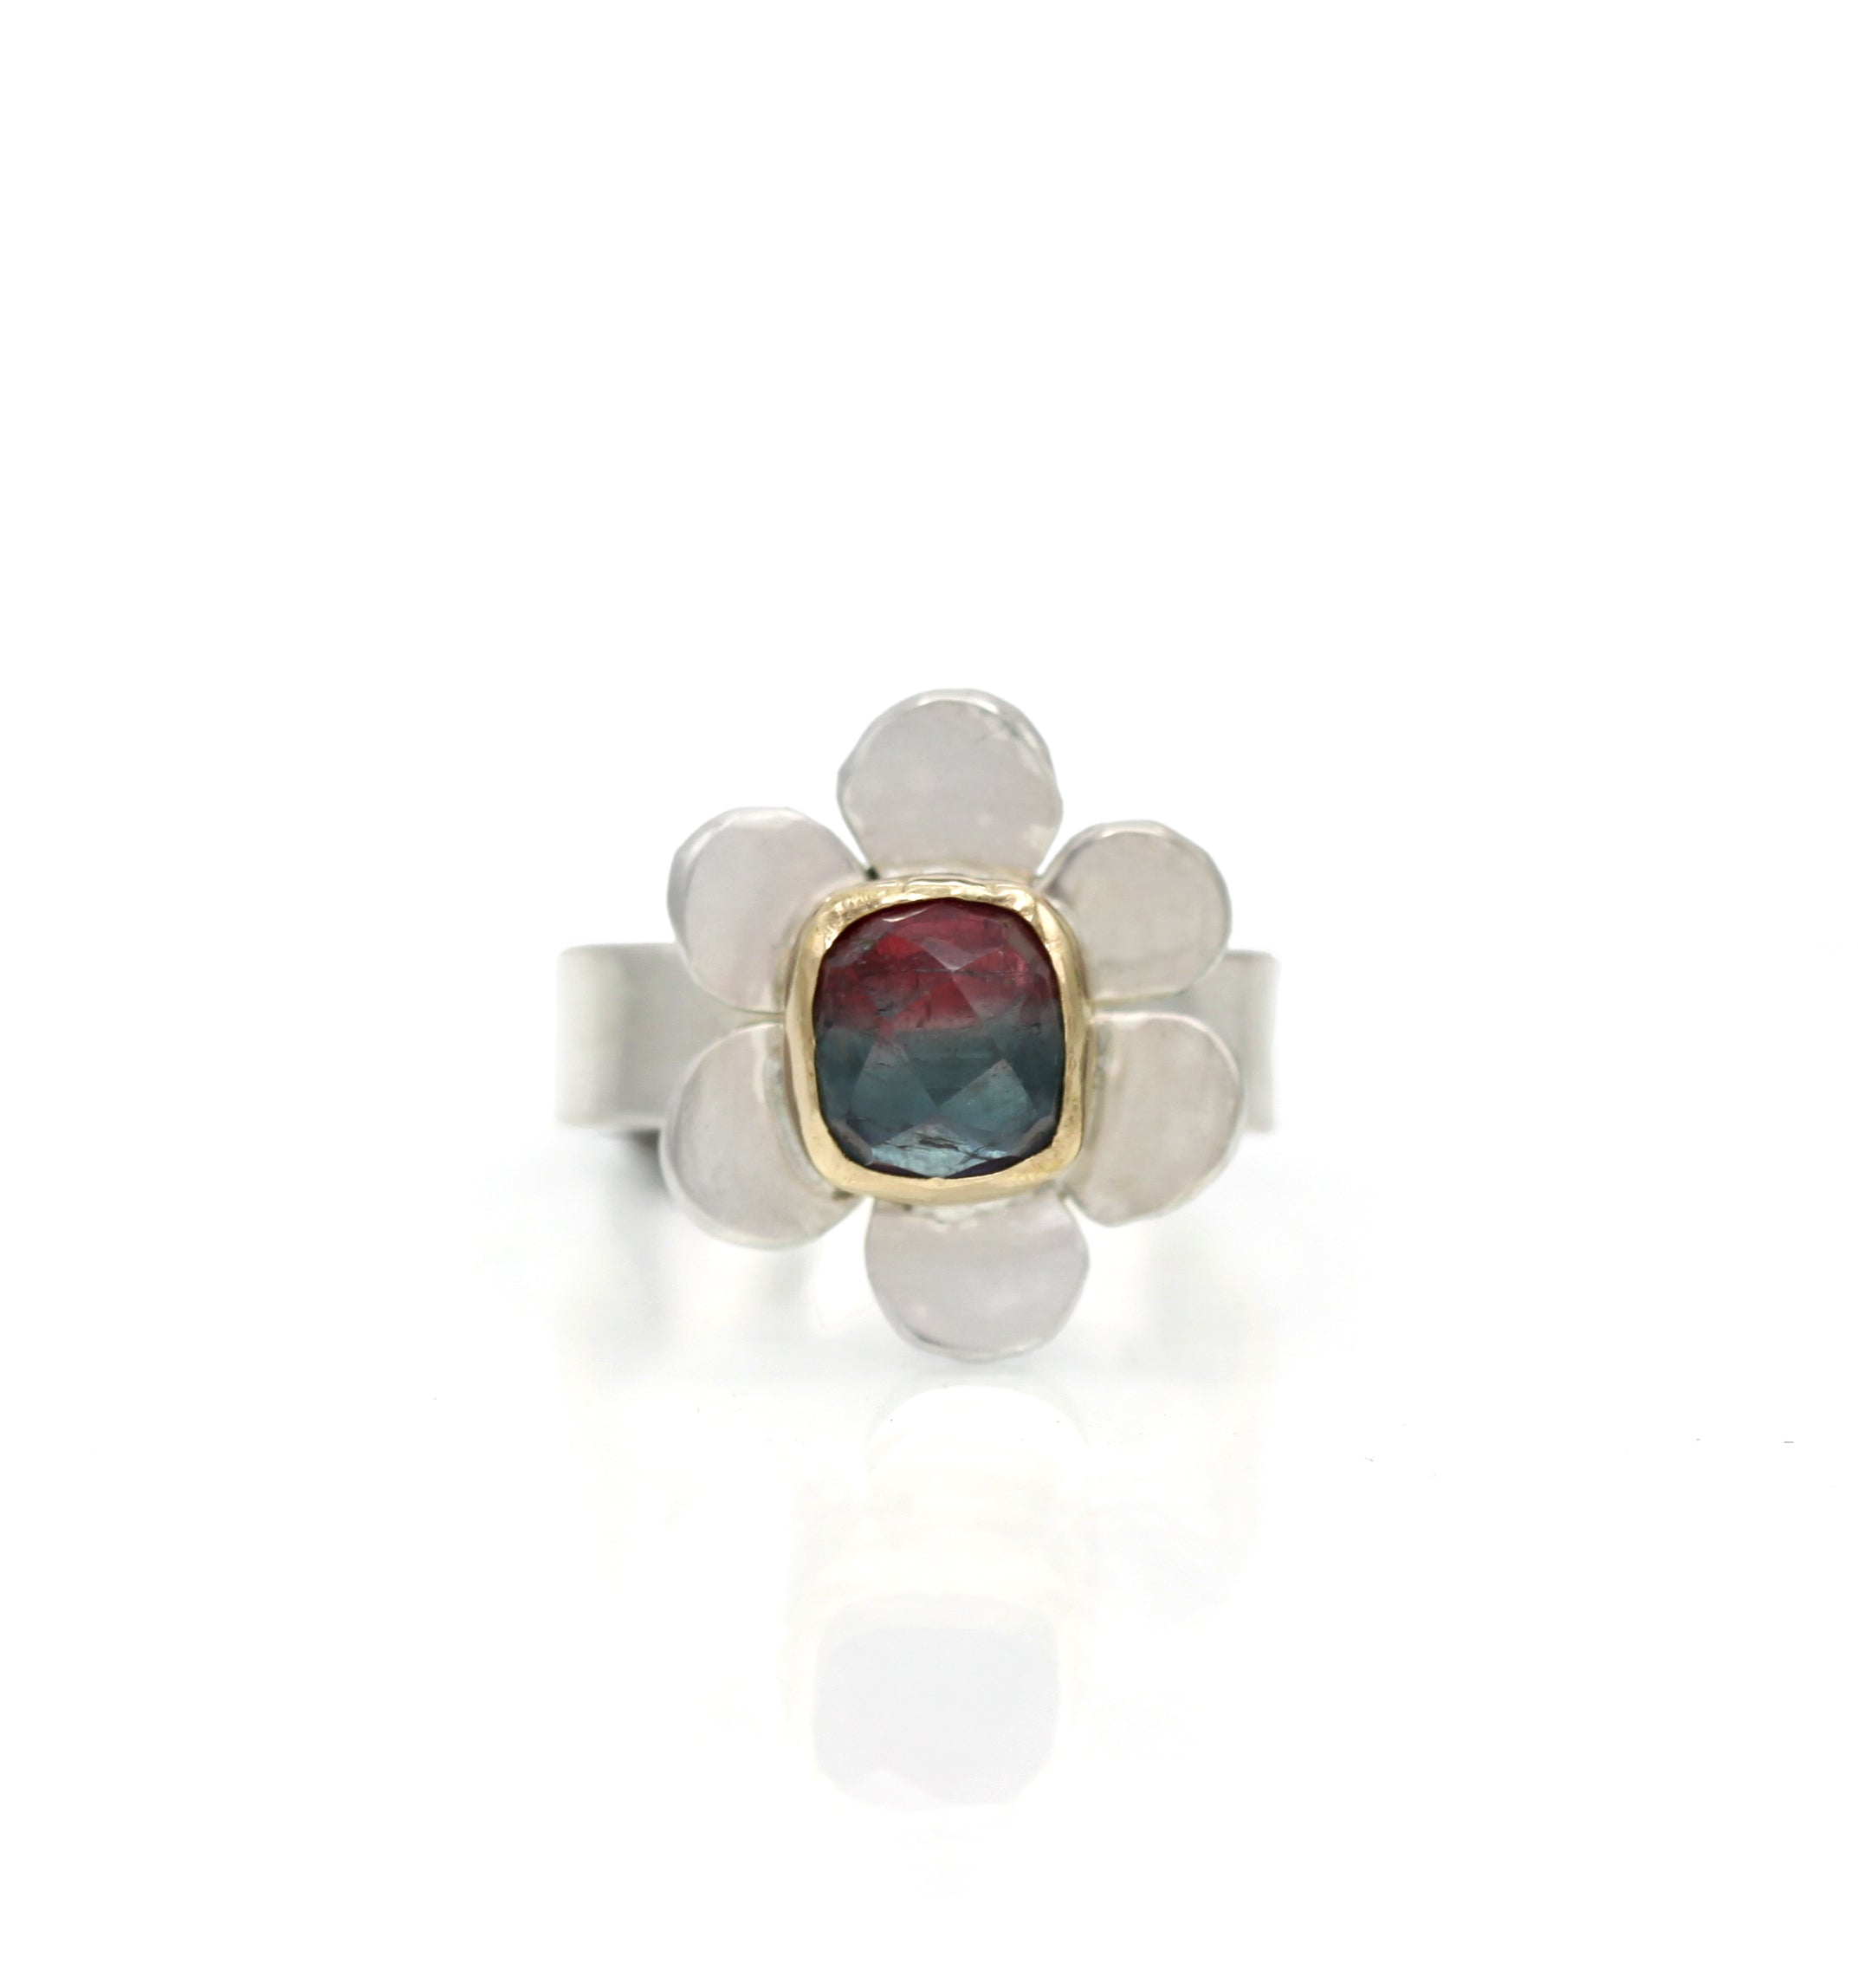 Bicolor Tourmaline Flower Ring, Sterling and 14K Pink and Blue Tourmaline Flower Ring, One of a Kind